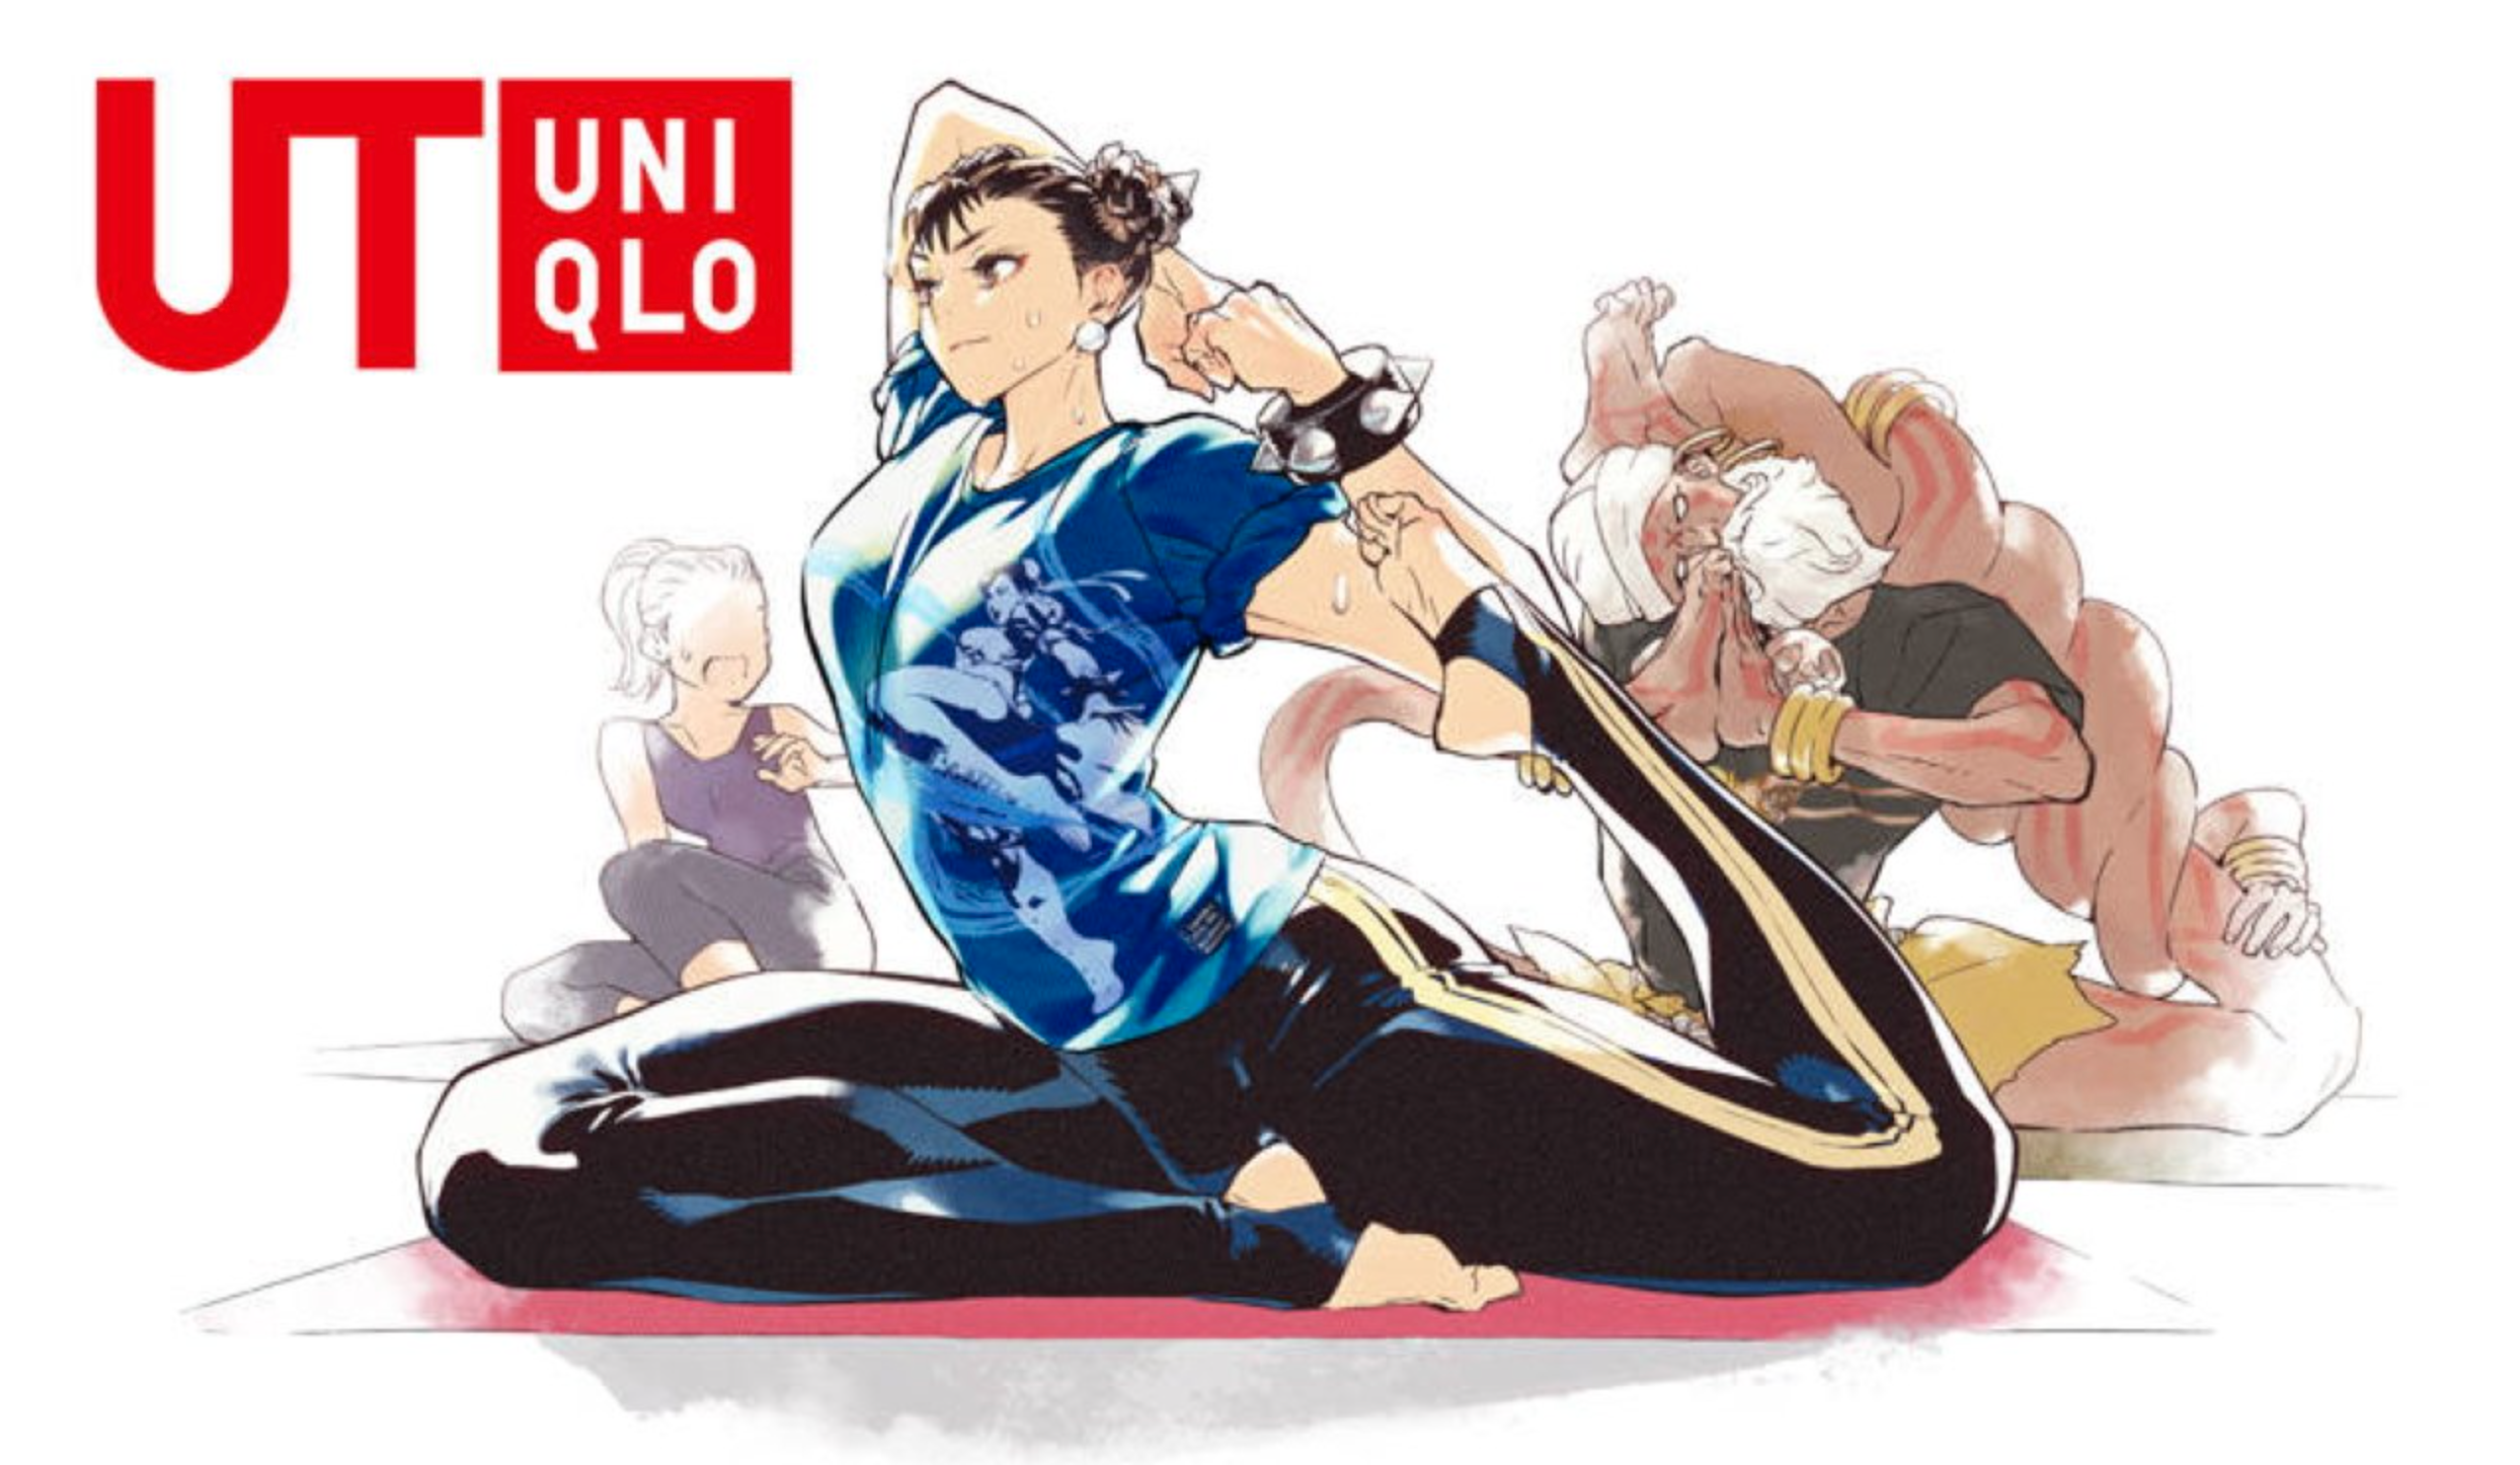 dumb video game brand collaborations - uniqlo street fighter